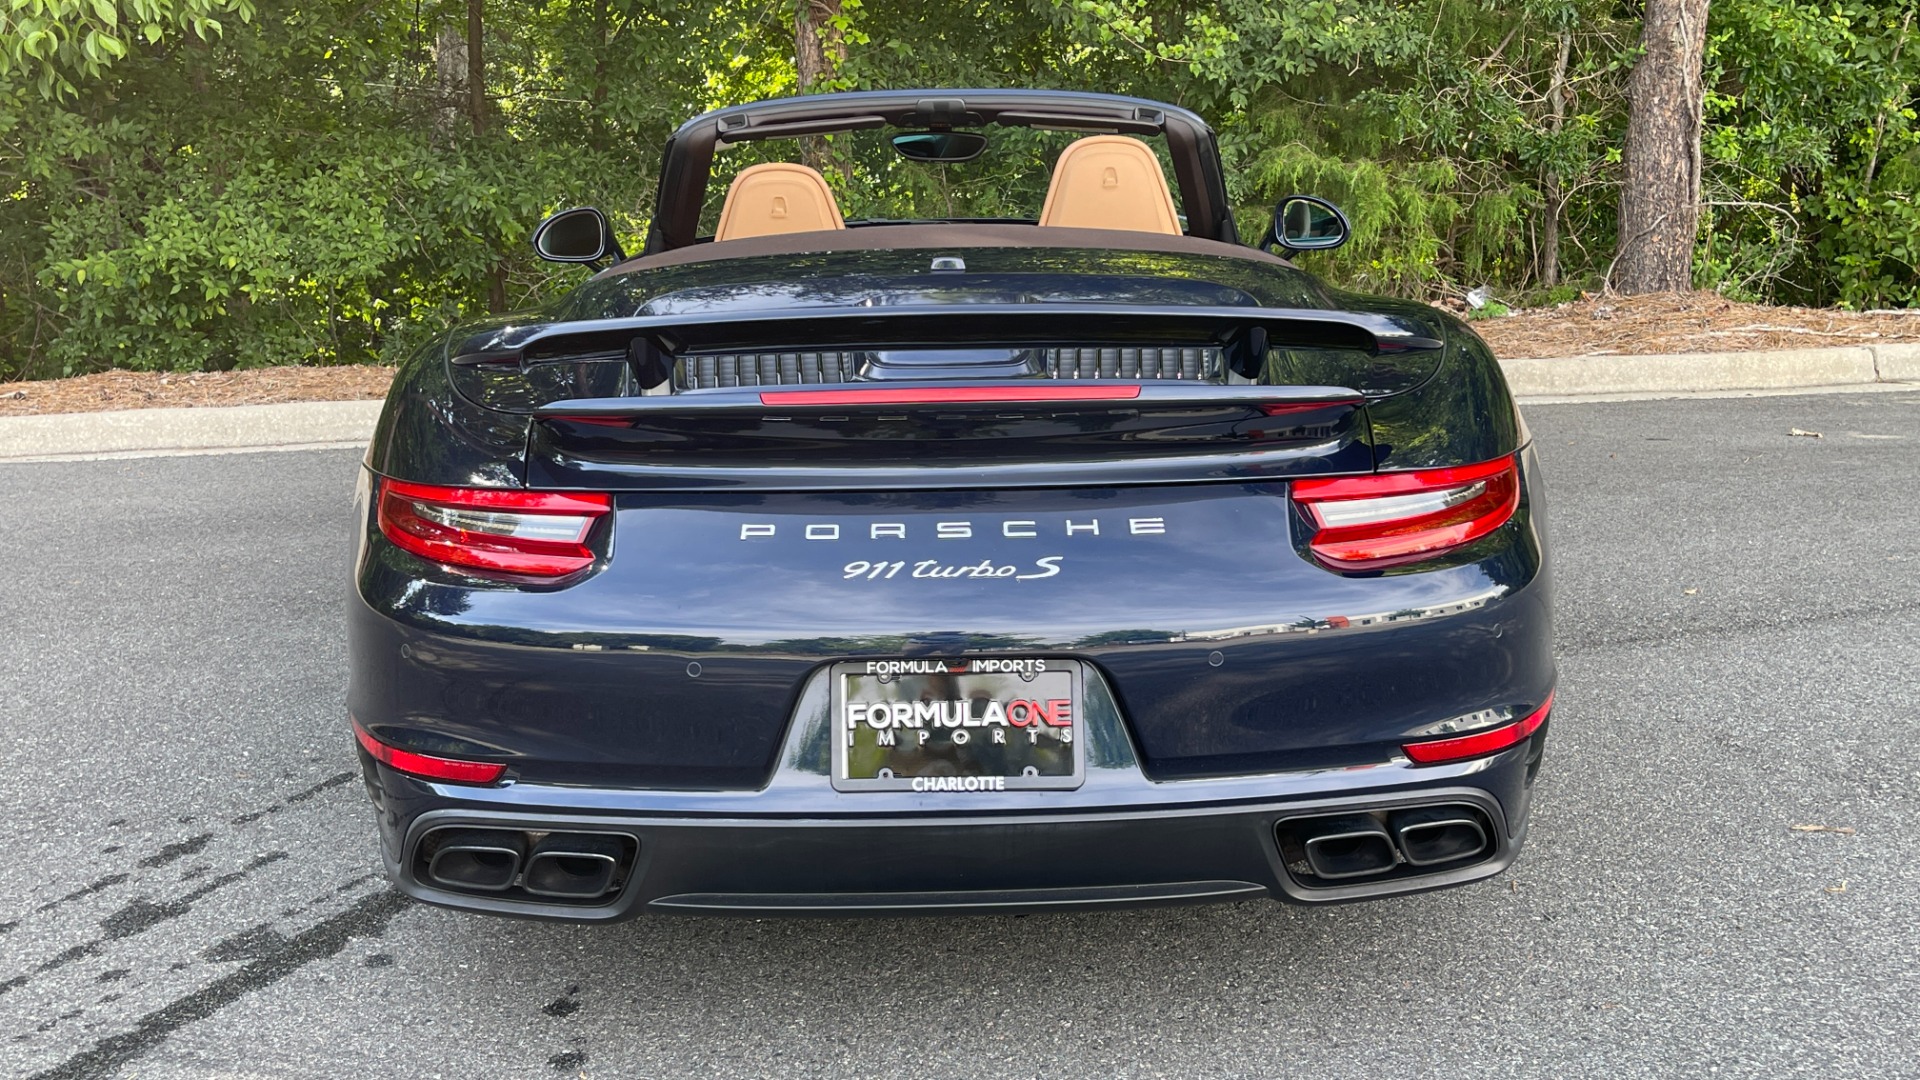 Used 2017 Porsche 911 Turbo S / CABRIOLET / FRONT LIFT / PDK / 20IN WHEELS for sale $179,999 at Formula Imports in Charlotte NC 28227 23